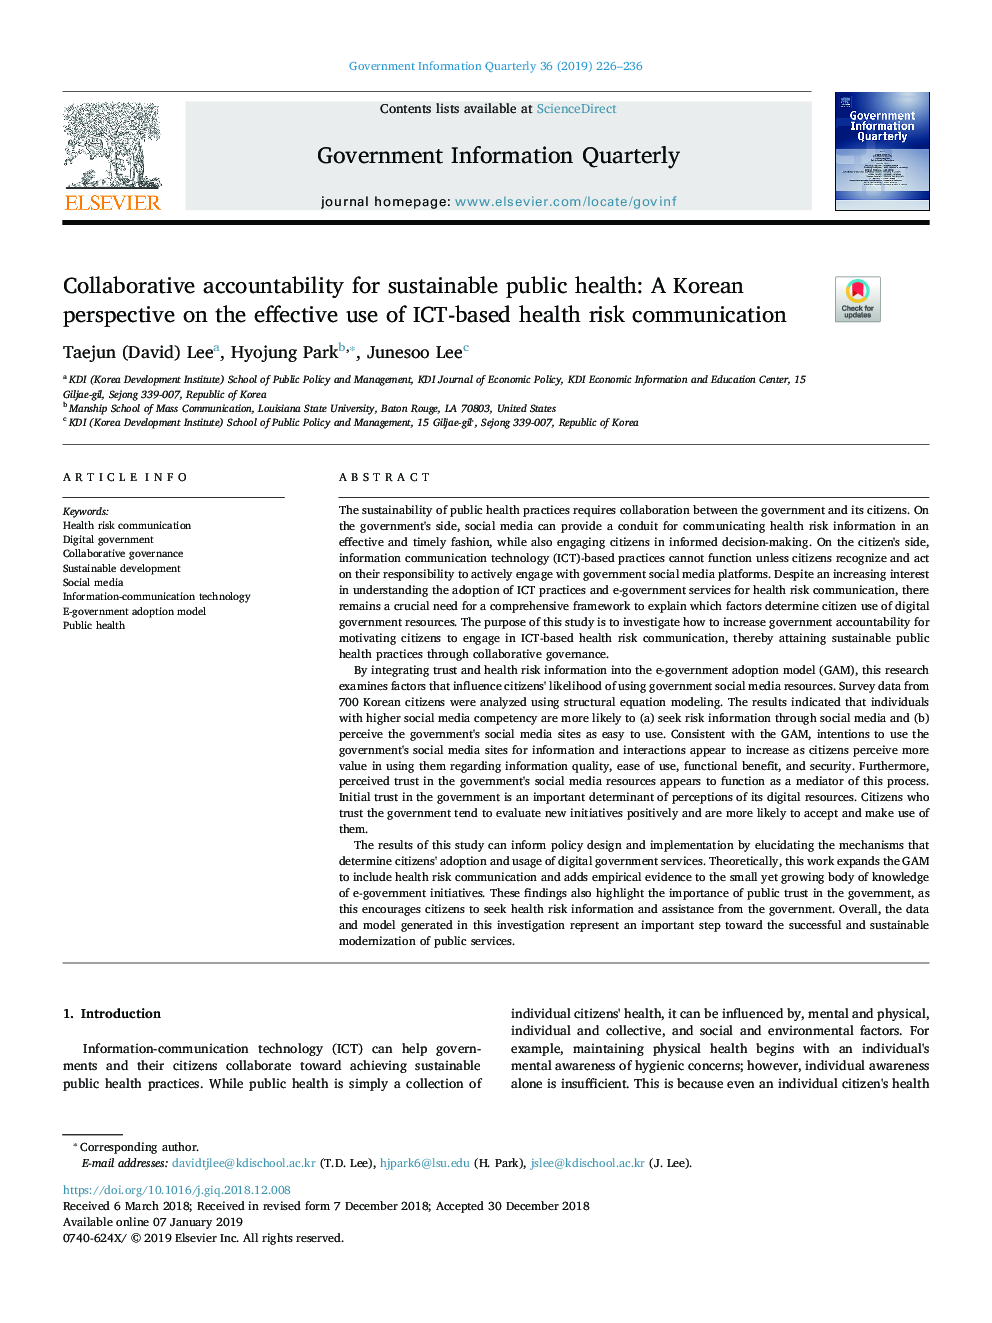 Collaborative accountability for sustainable public health: A Korean perspective on the effective use of ICT-based health risk communication